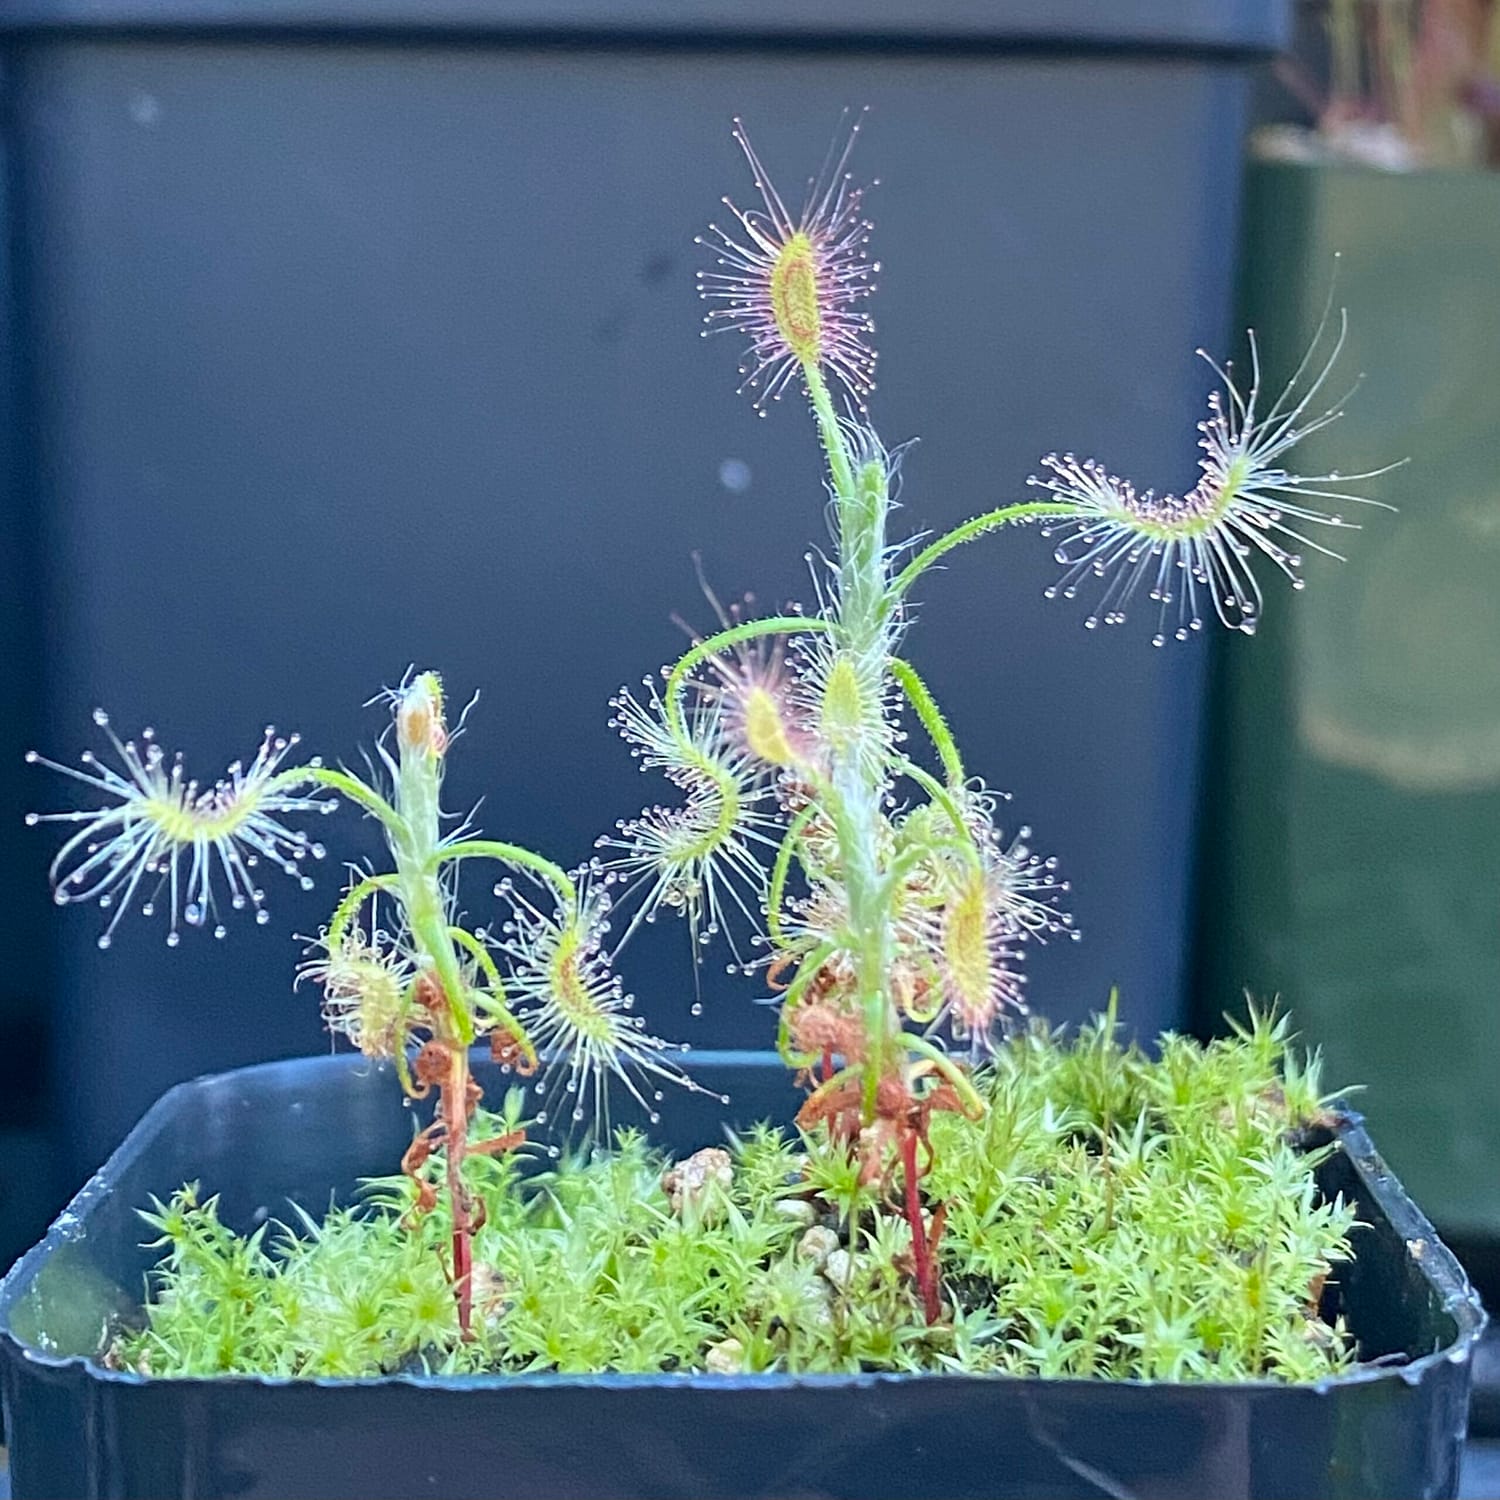 A Drosera scorpioides plant in a black container